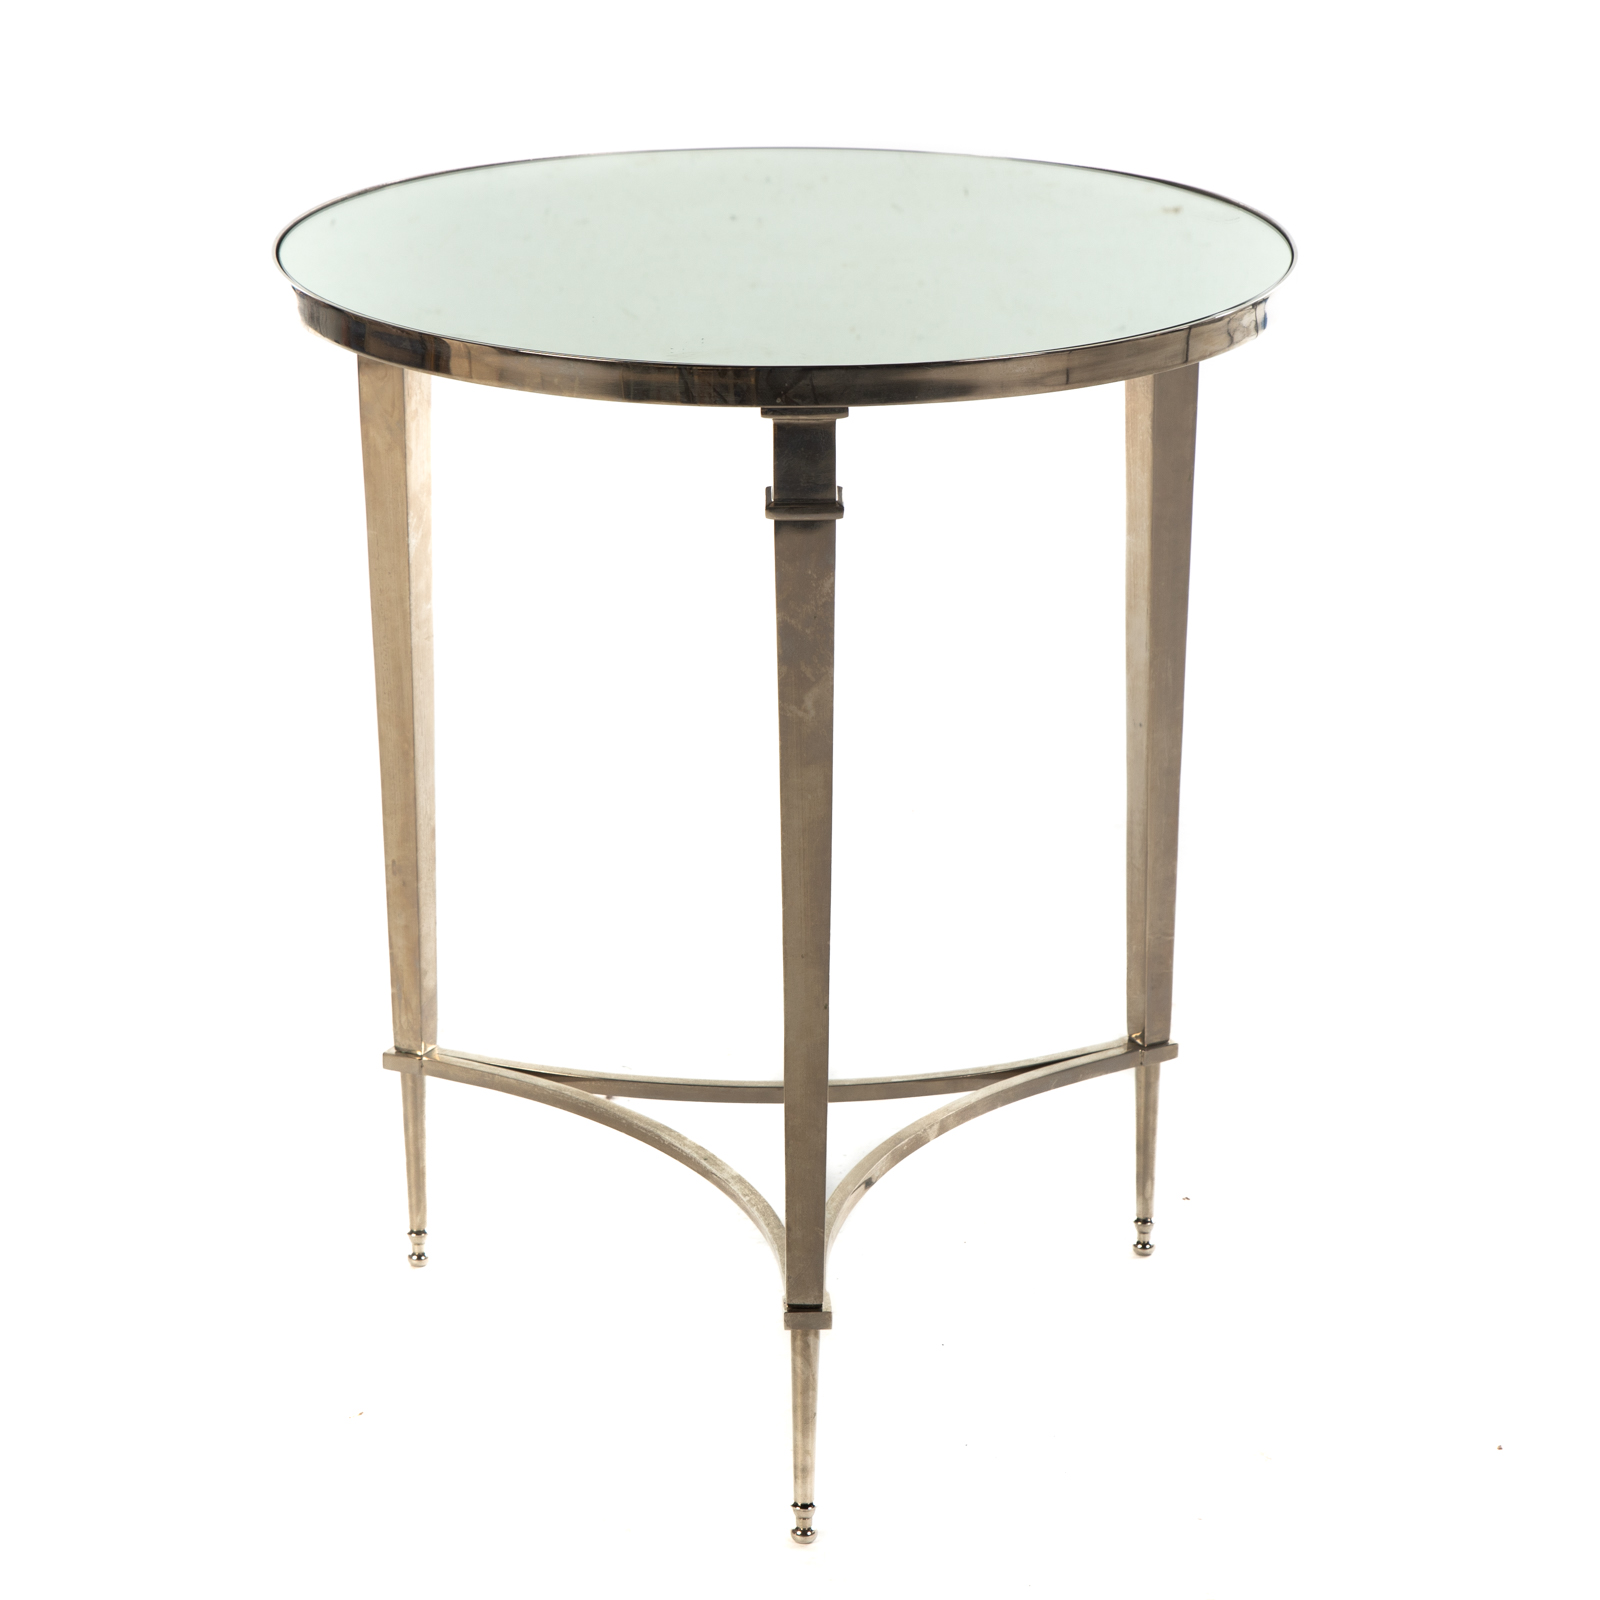 CONTEMPORARY ROUND METAL END TABLE 2875cd